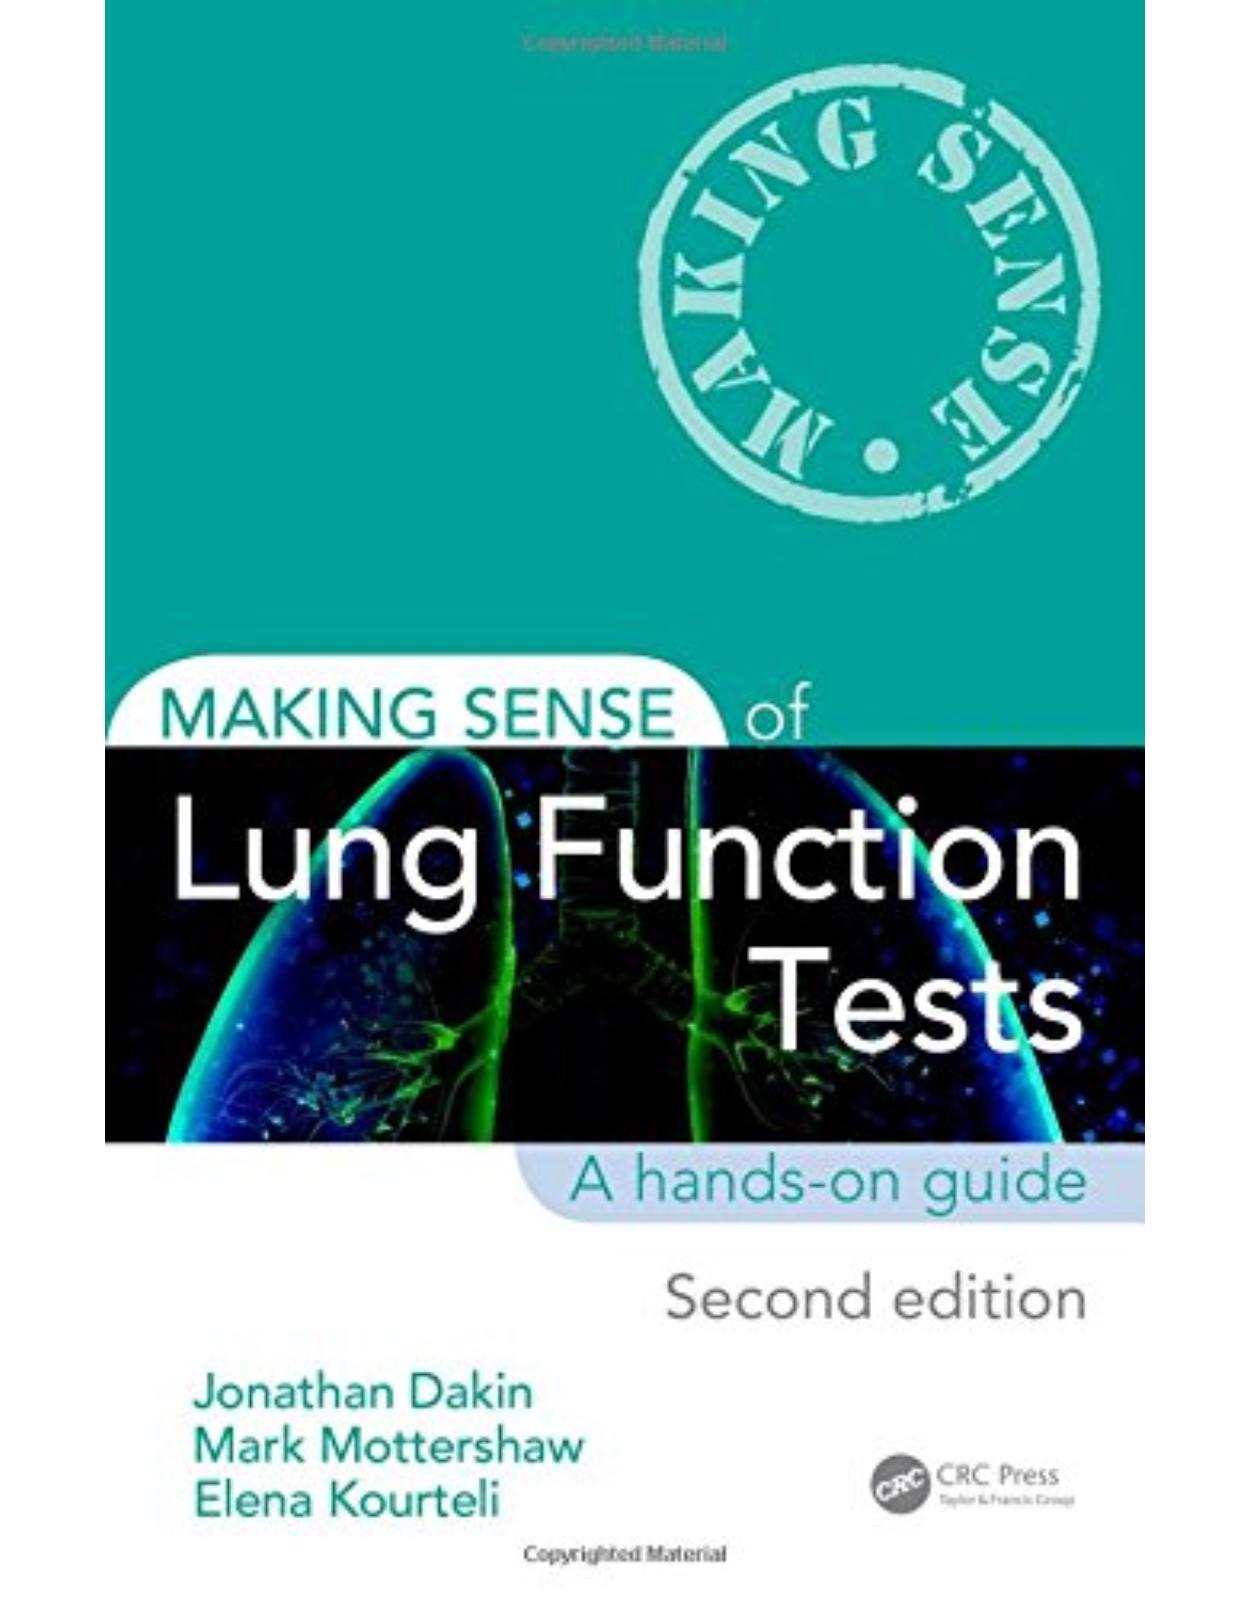 Making Sense of Lung Function Tests, Second Edition